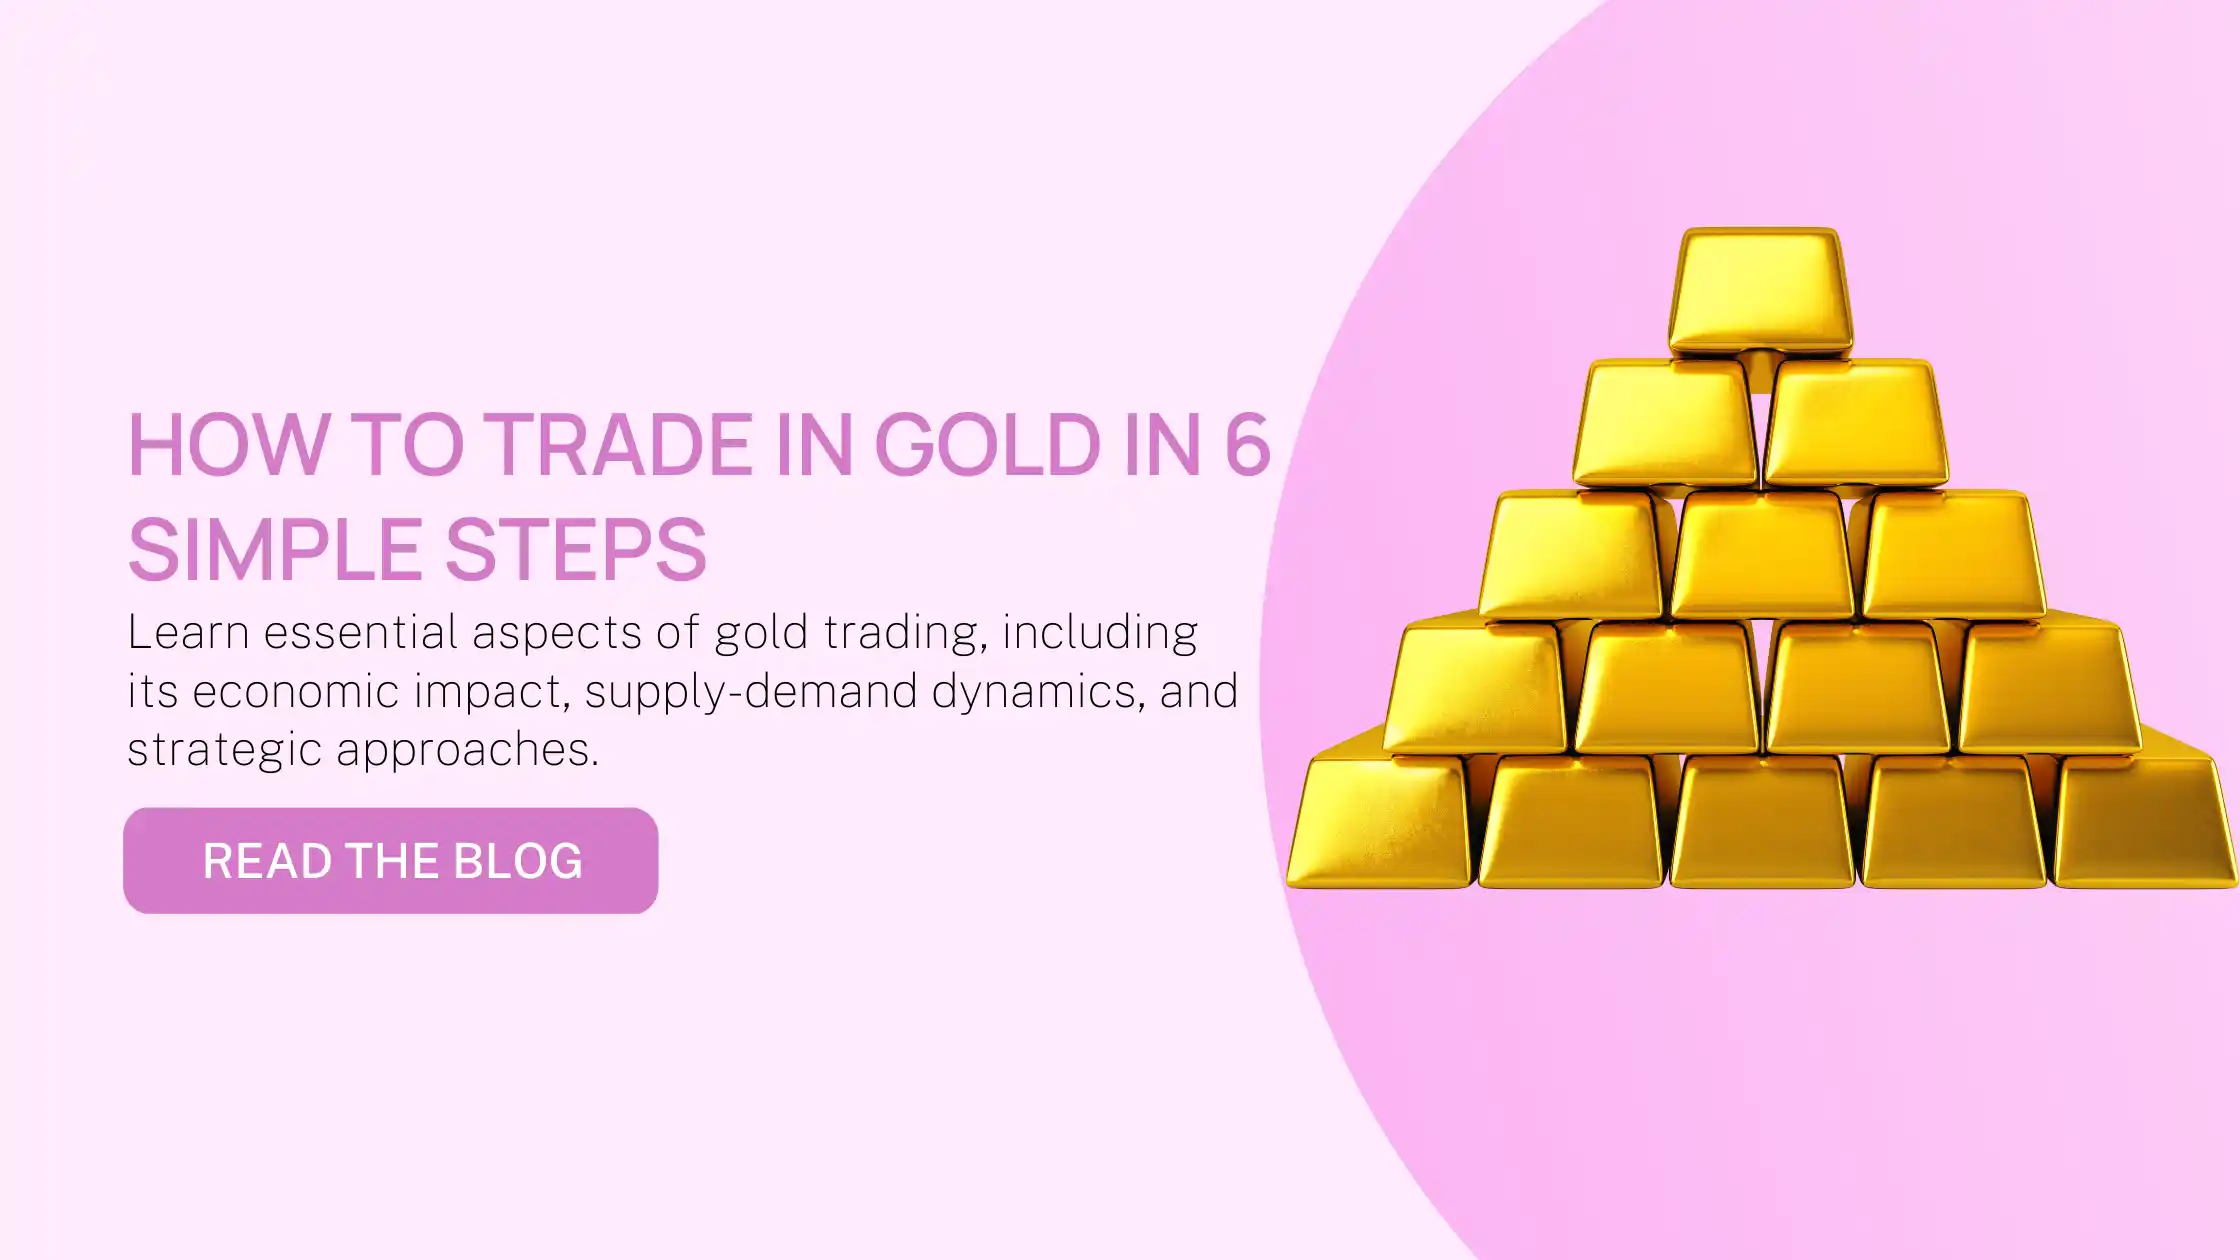 How to Trade in Gold in 6 Simple Steps